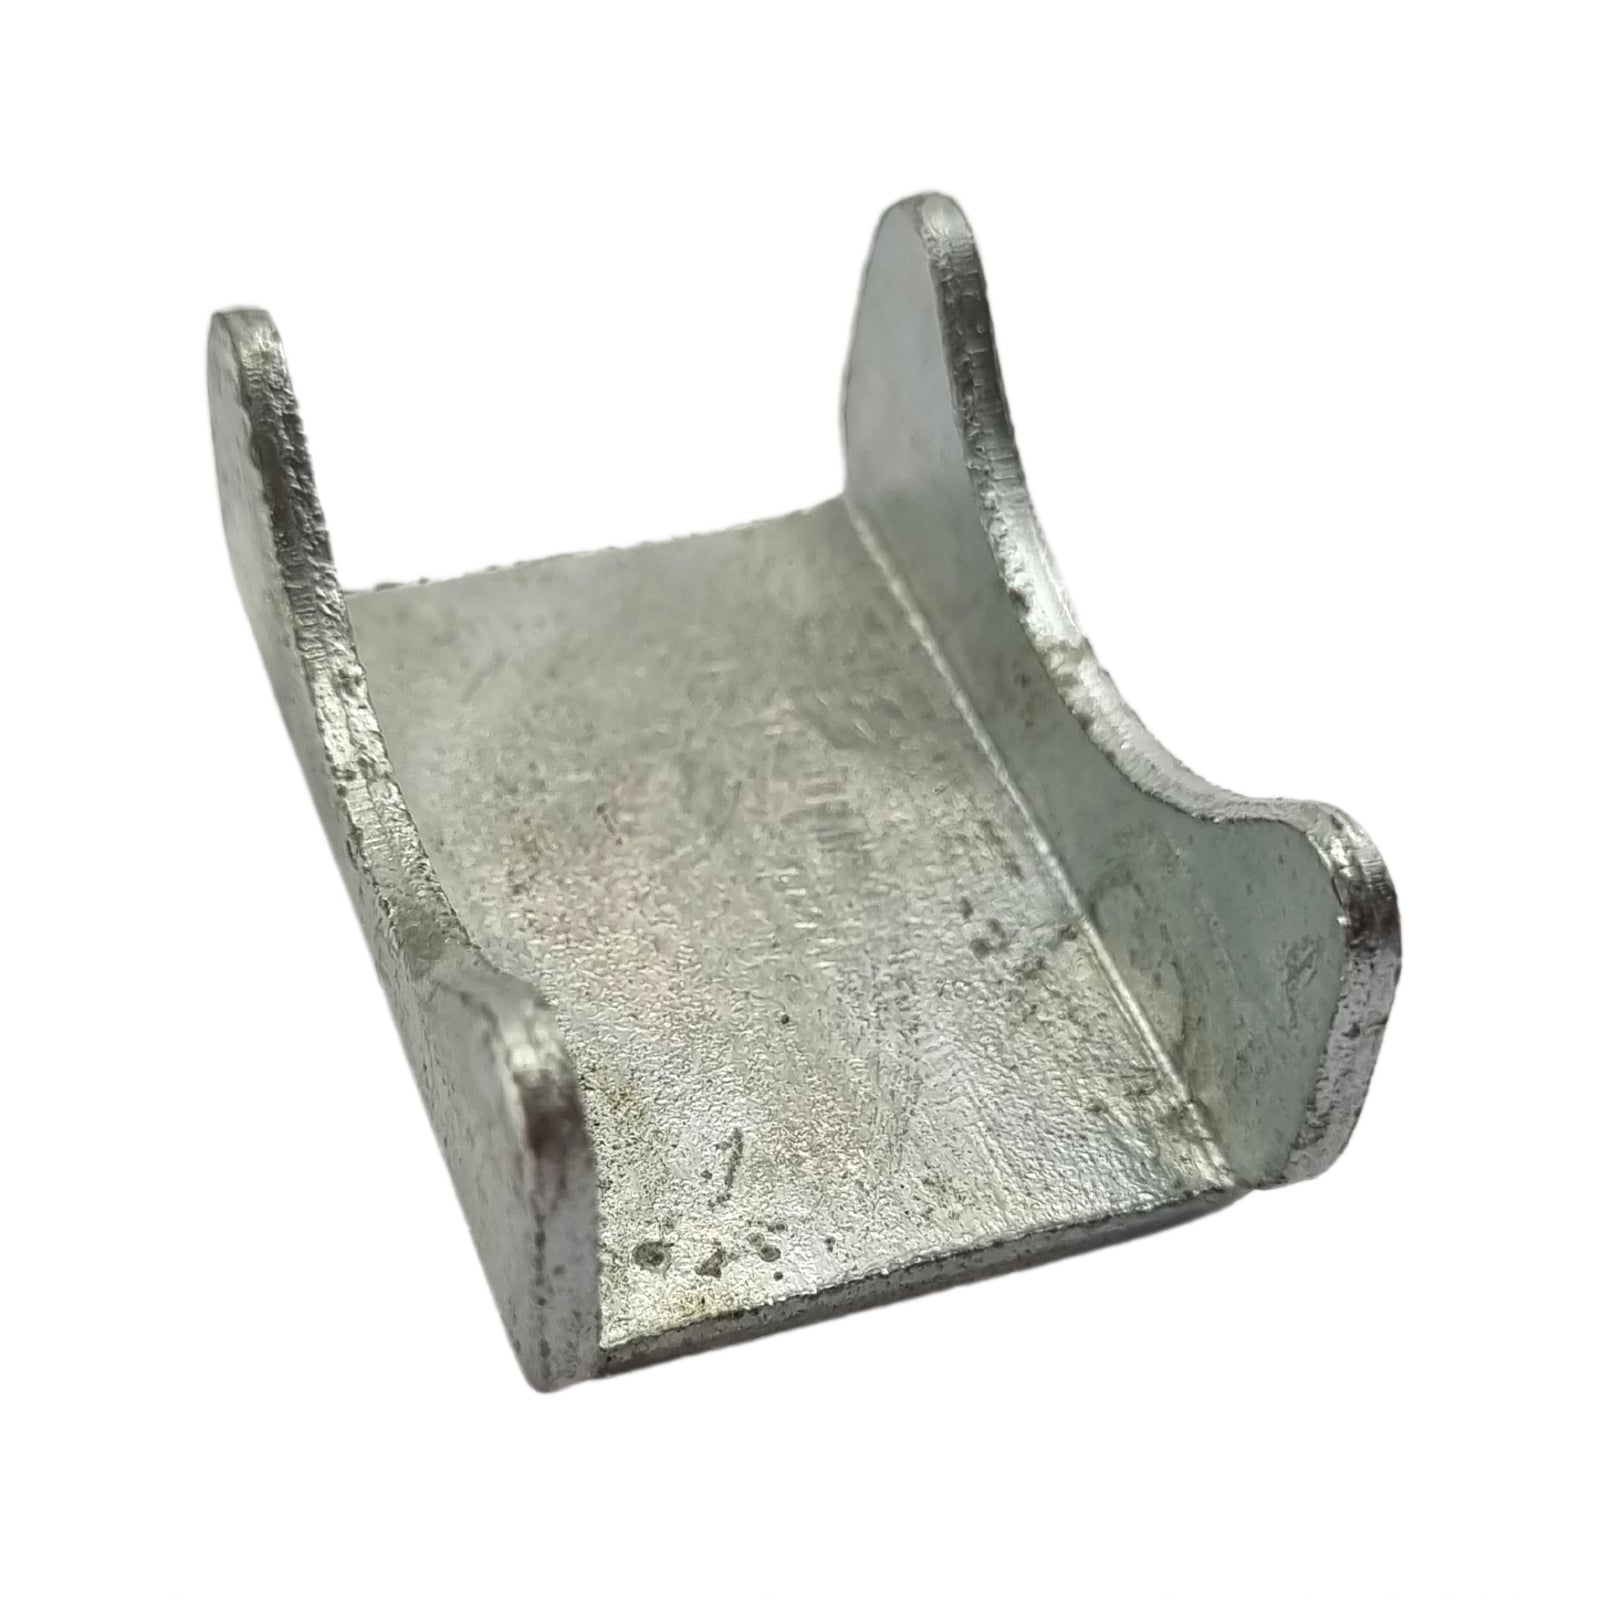 Hinge Strap Attachment - Galvanised. Australian made. Fence & Gate Fittings. Shop online chain.com.au